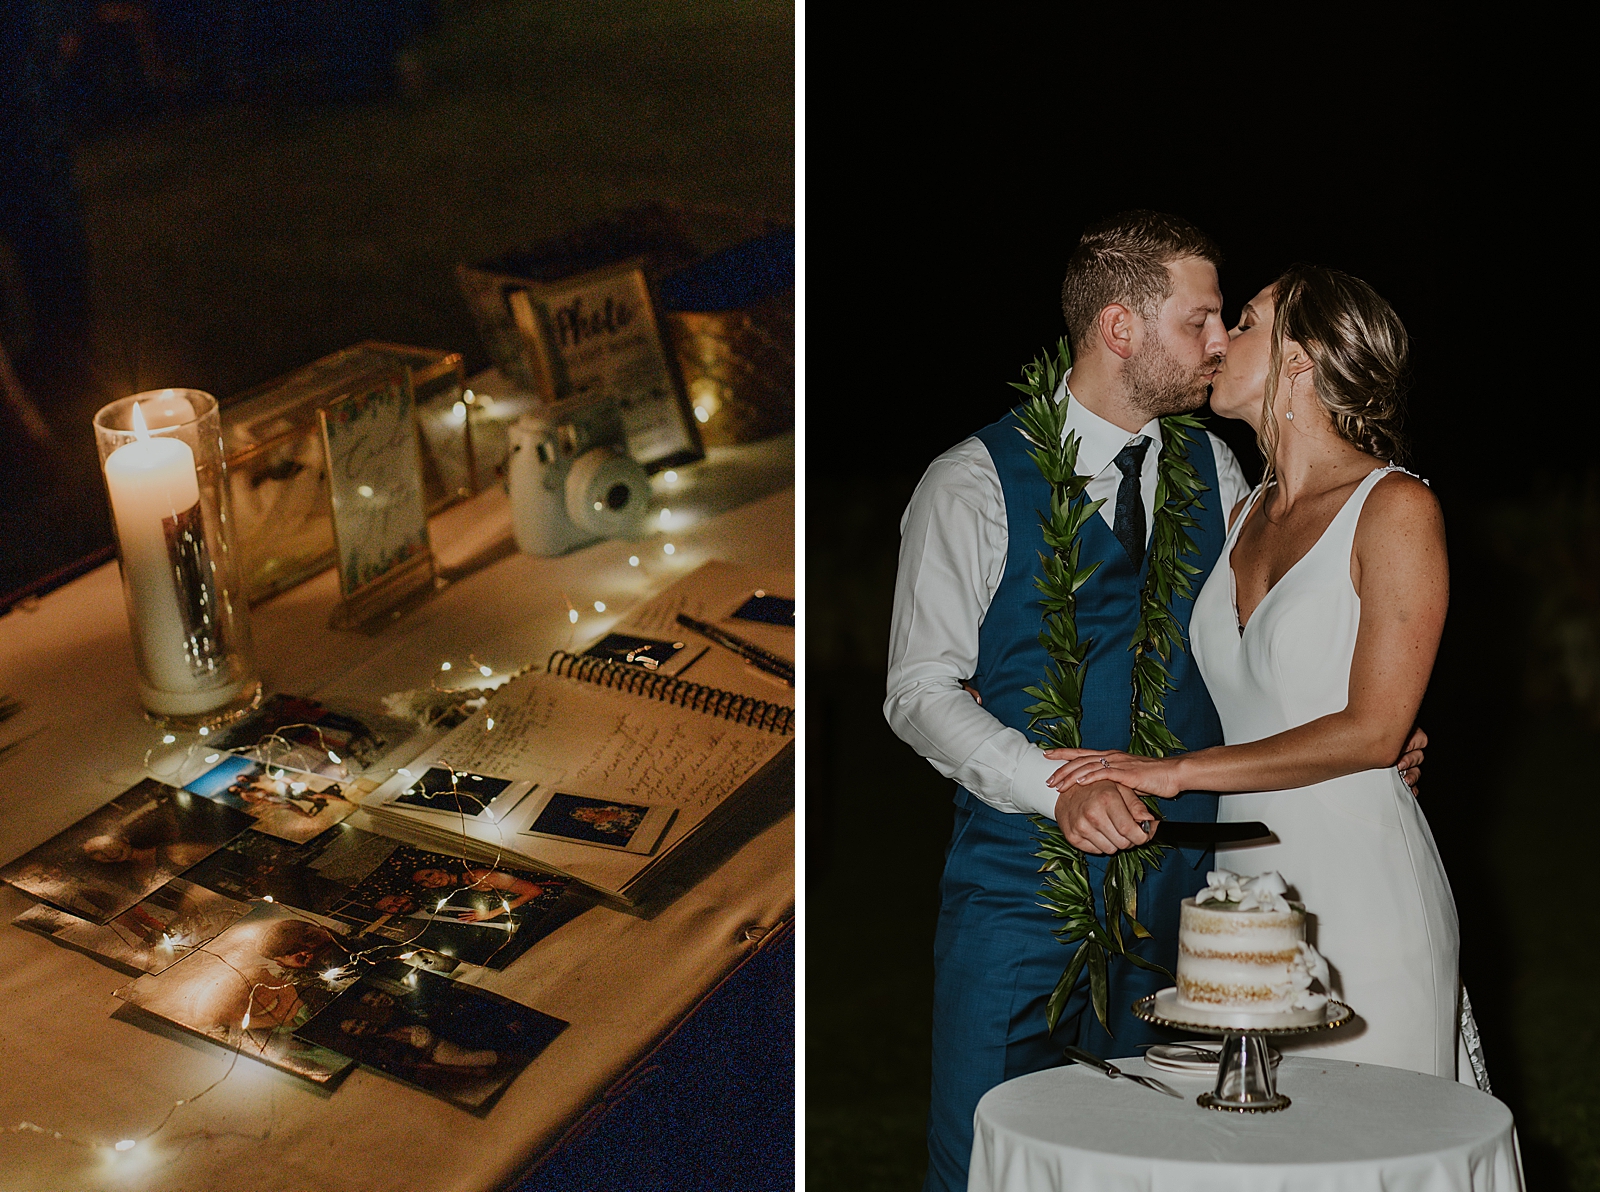 Detail shot of pictures and wedding book and Bride and Groom kissing for Cake Cutting